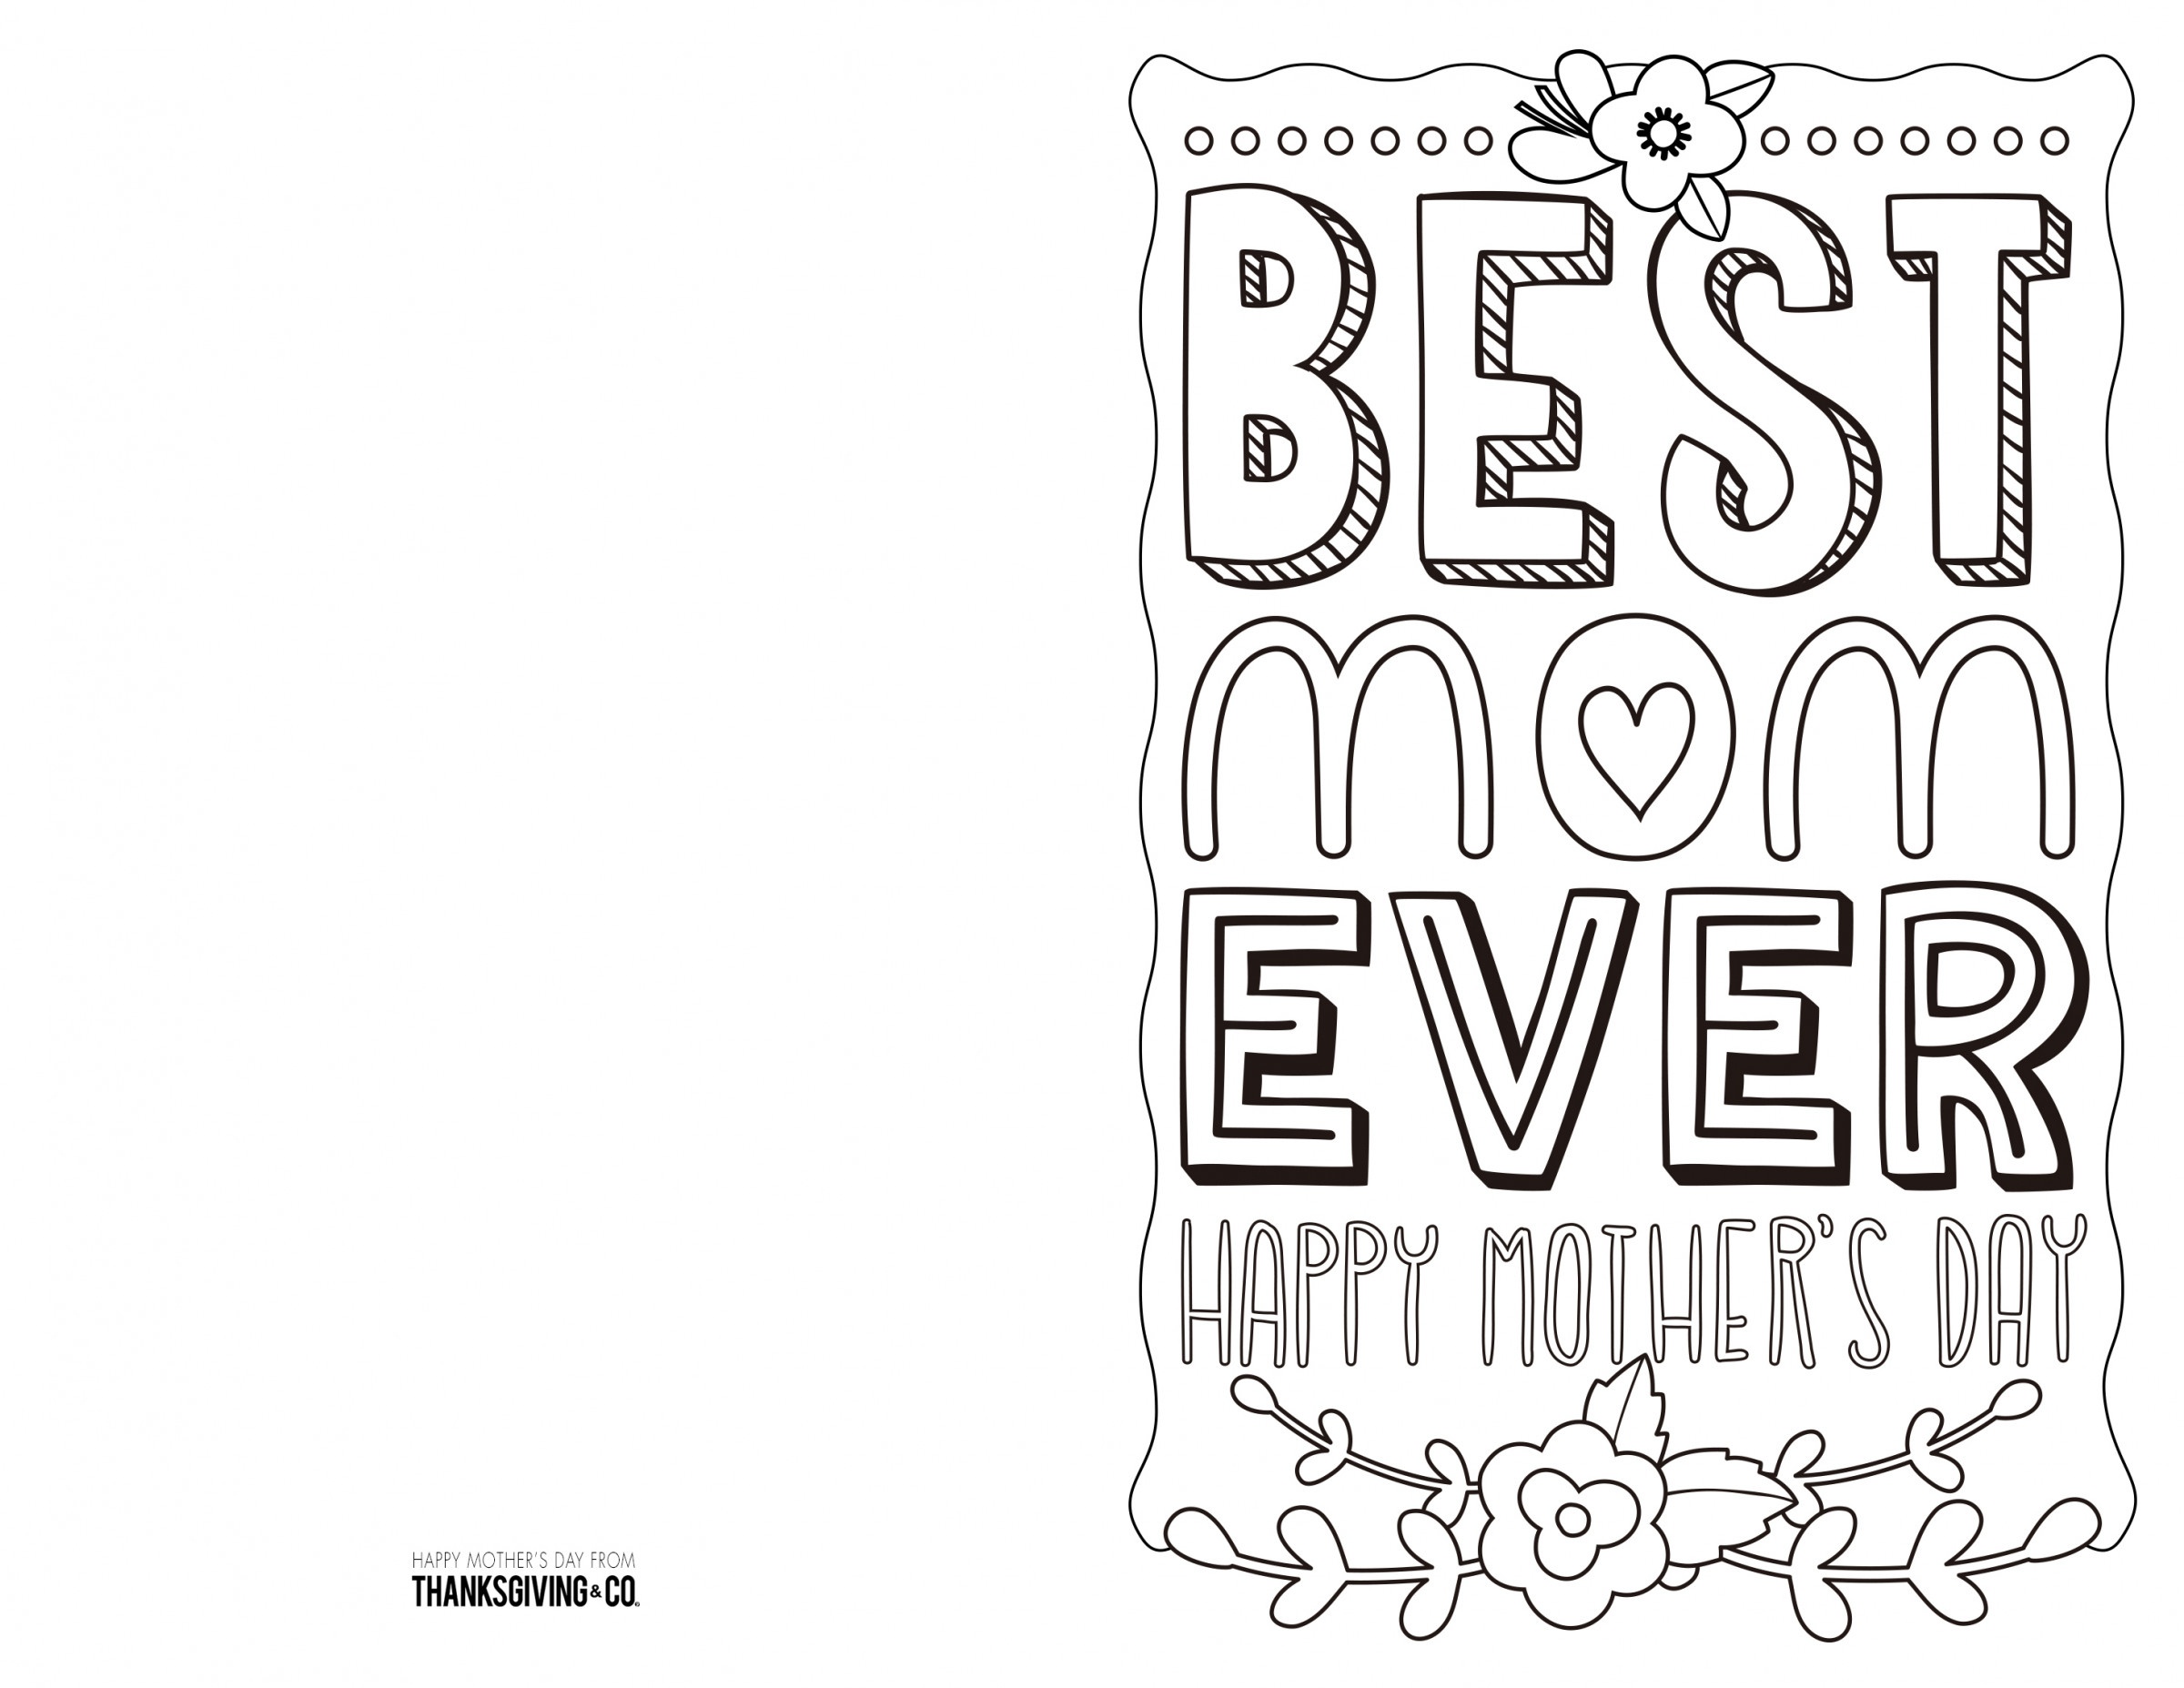 Coloring ~ Coloring Mothers Day Card Free Printable Cards To Color - Free Printable Cards To Color